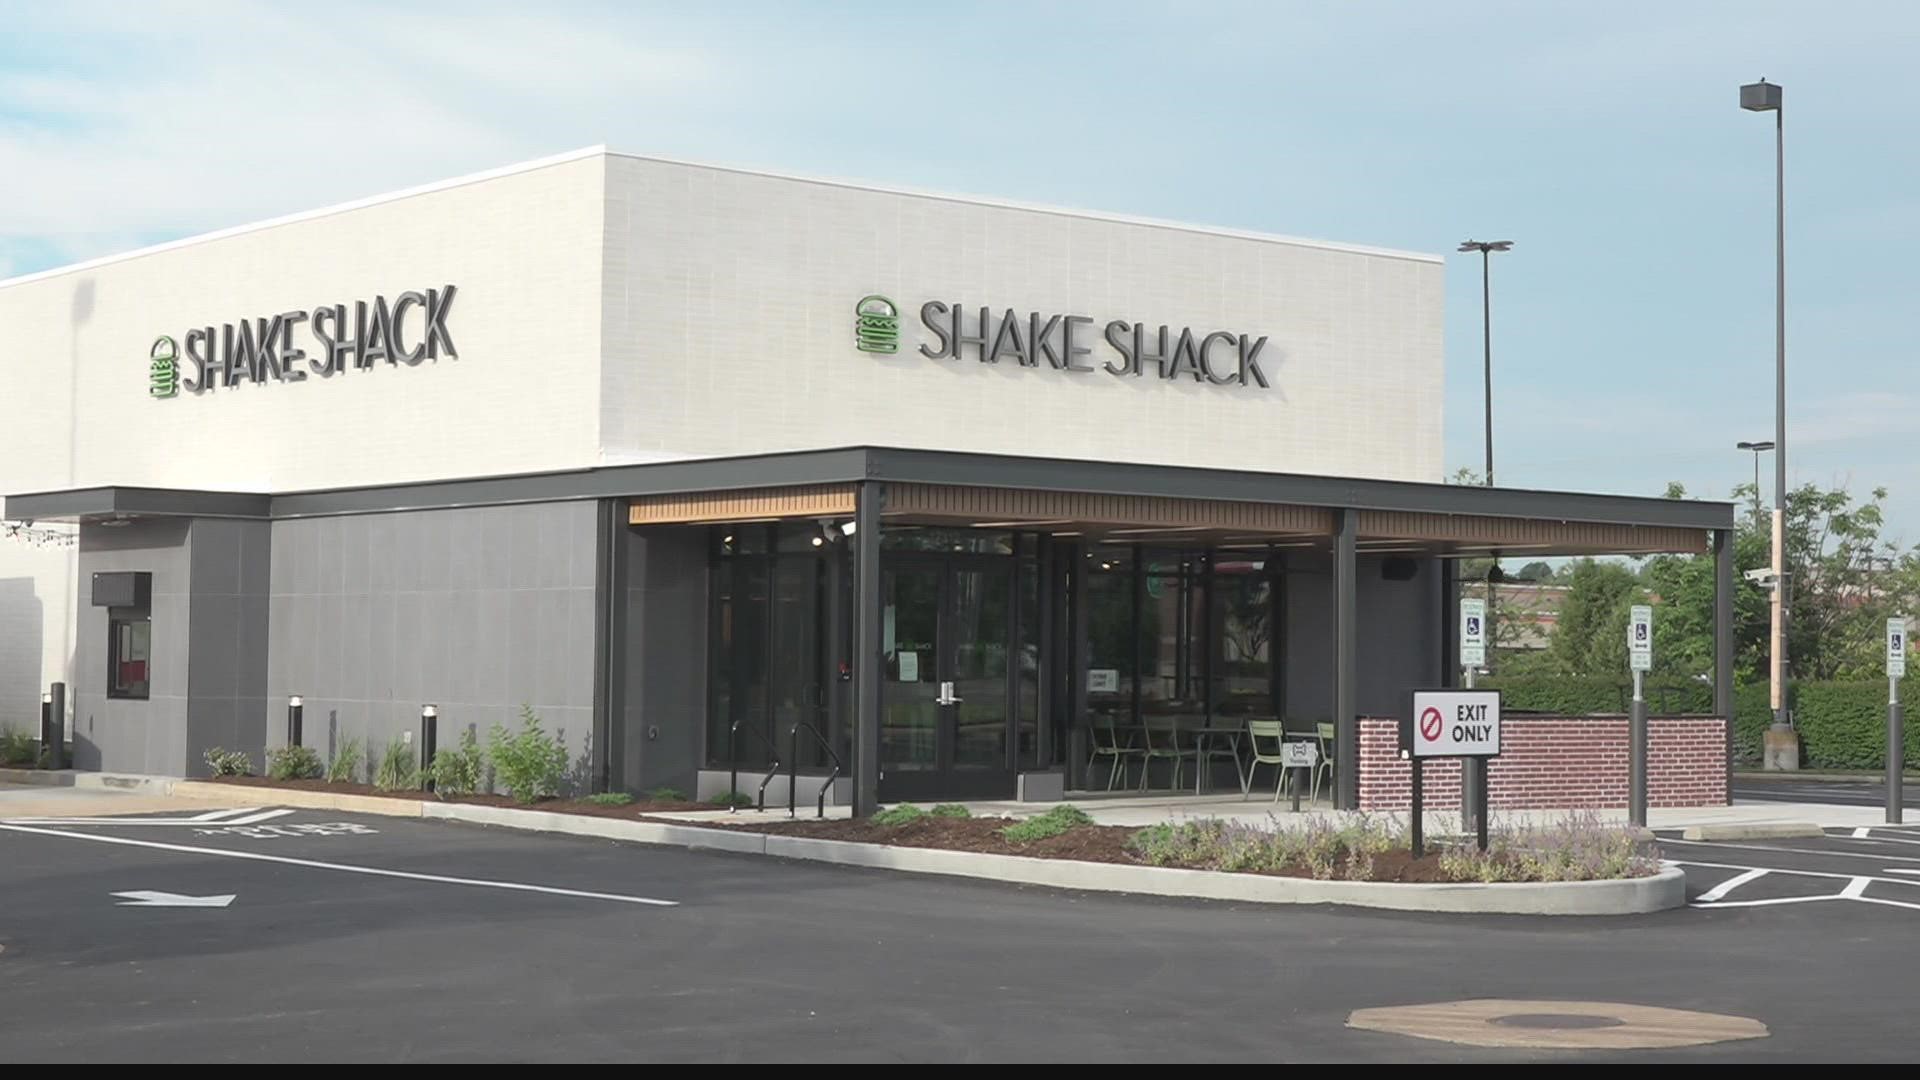 A new Shake Shack location is opening in Chesterfield on Friday, June 24. It will be the first in the area and just the sixth nationwide to have a drive-thru.